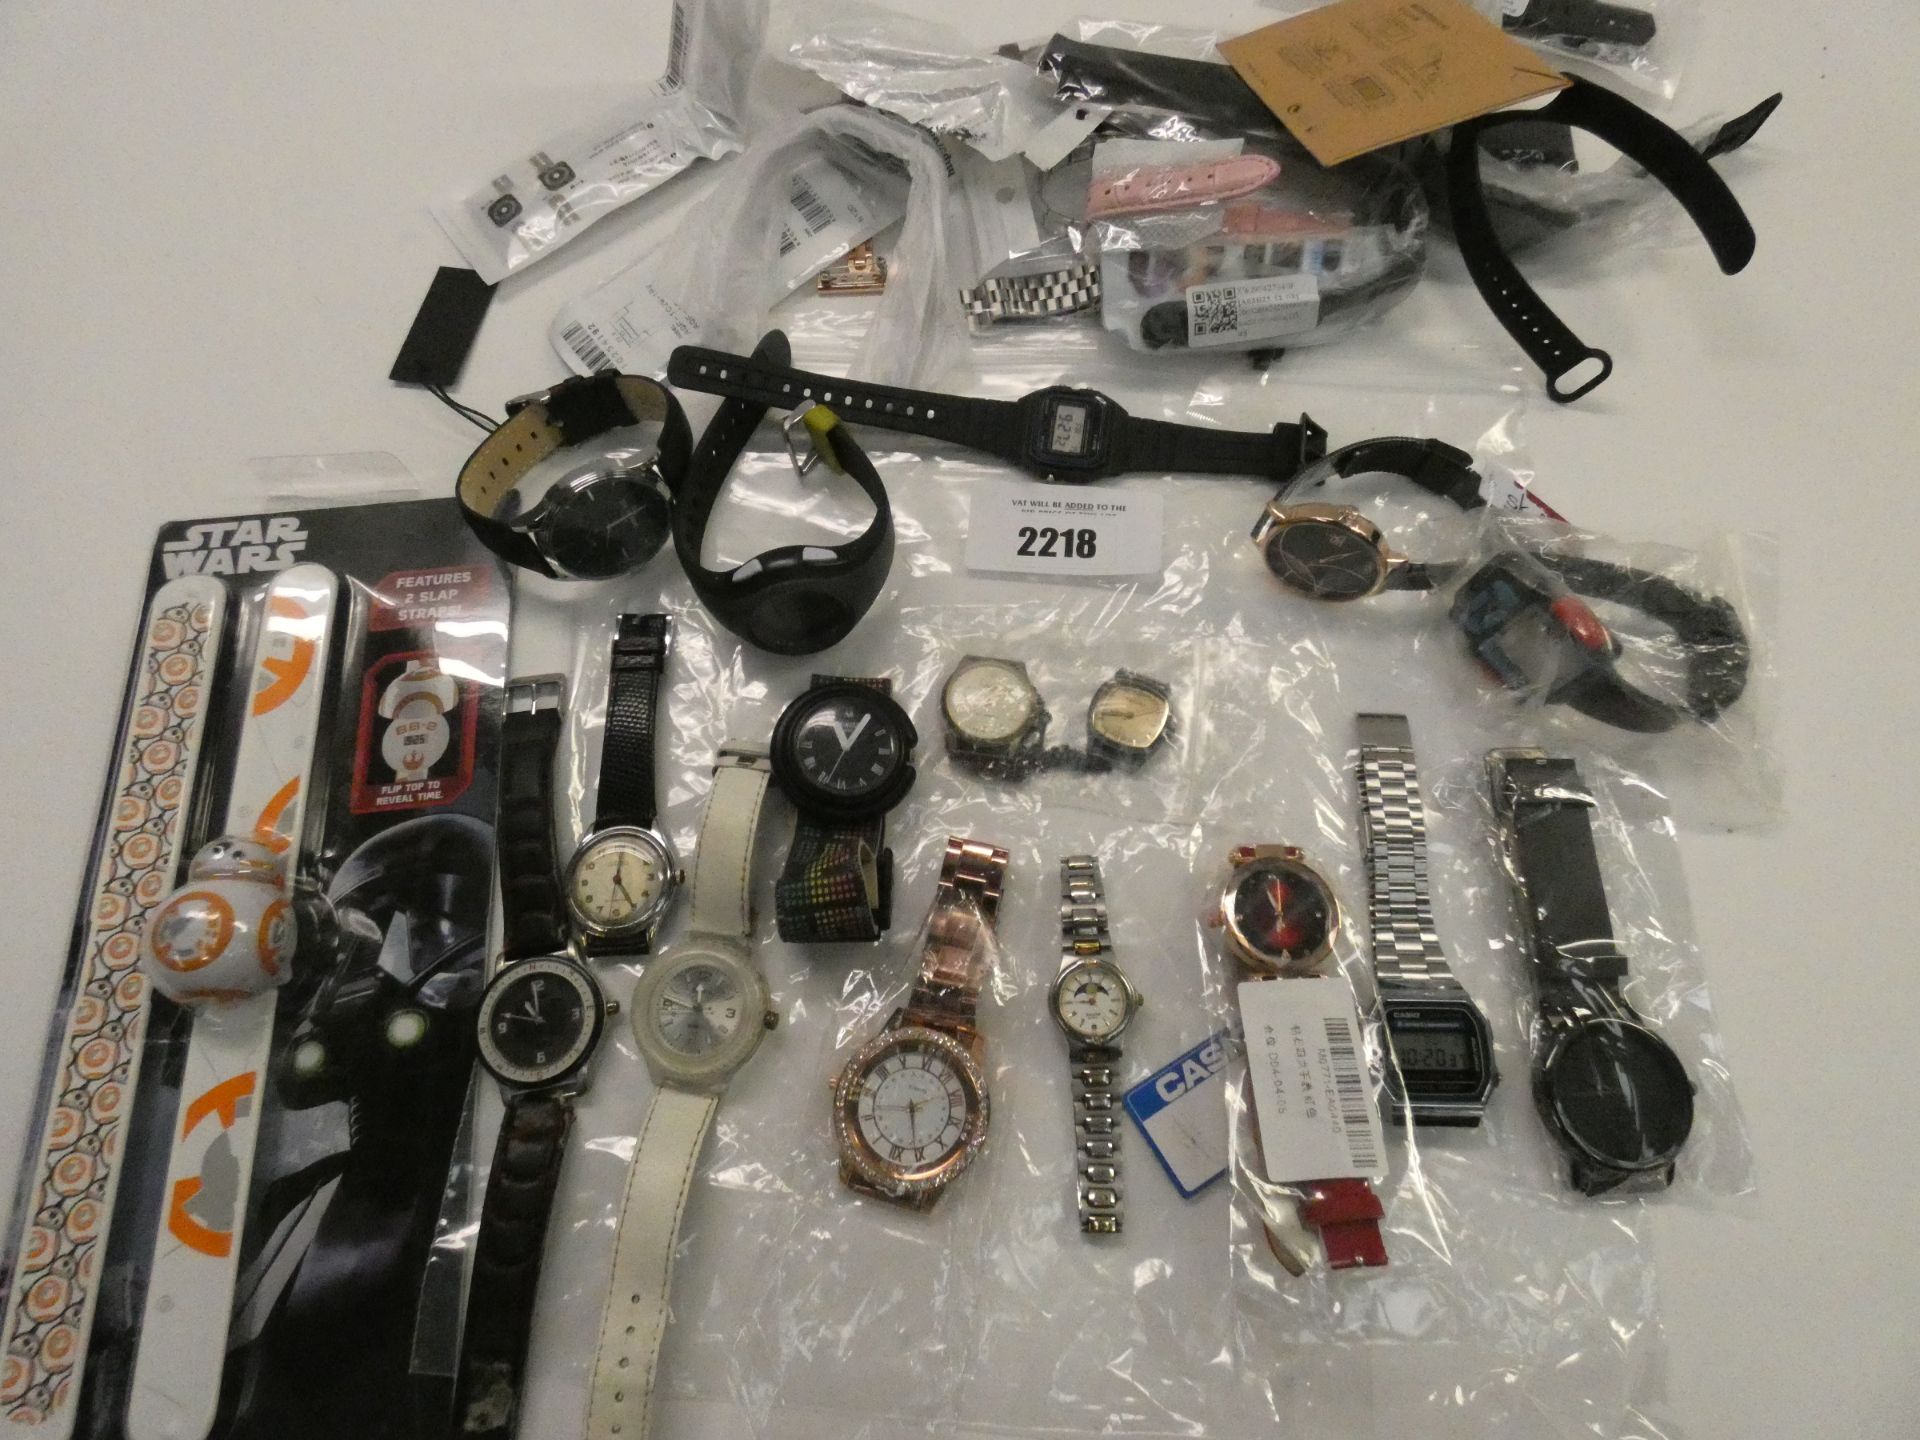 Quantity of various wristwatches and straps